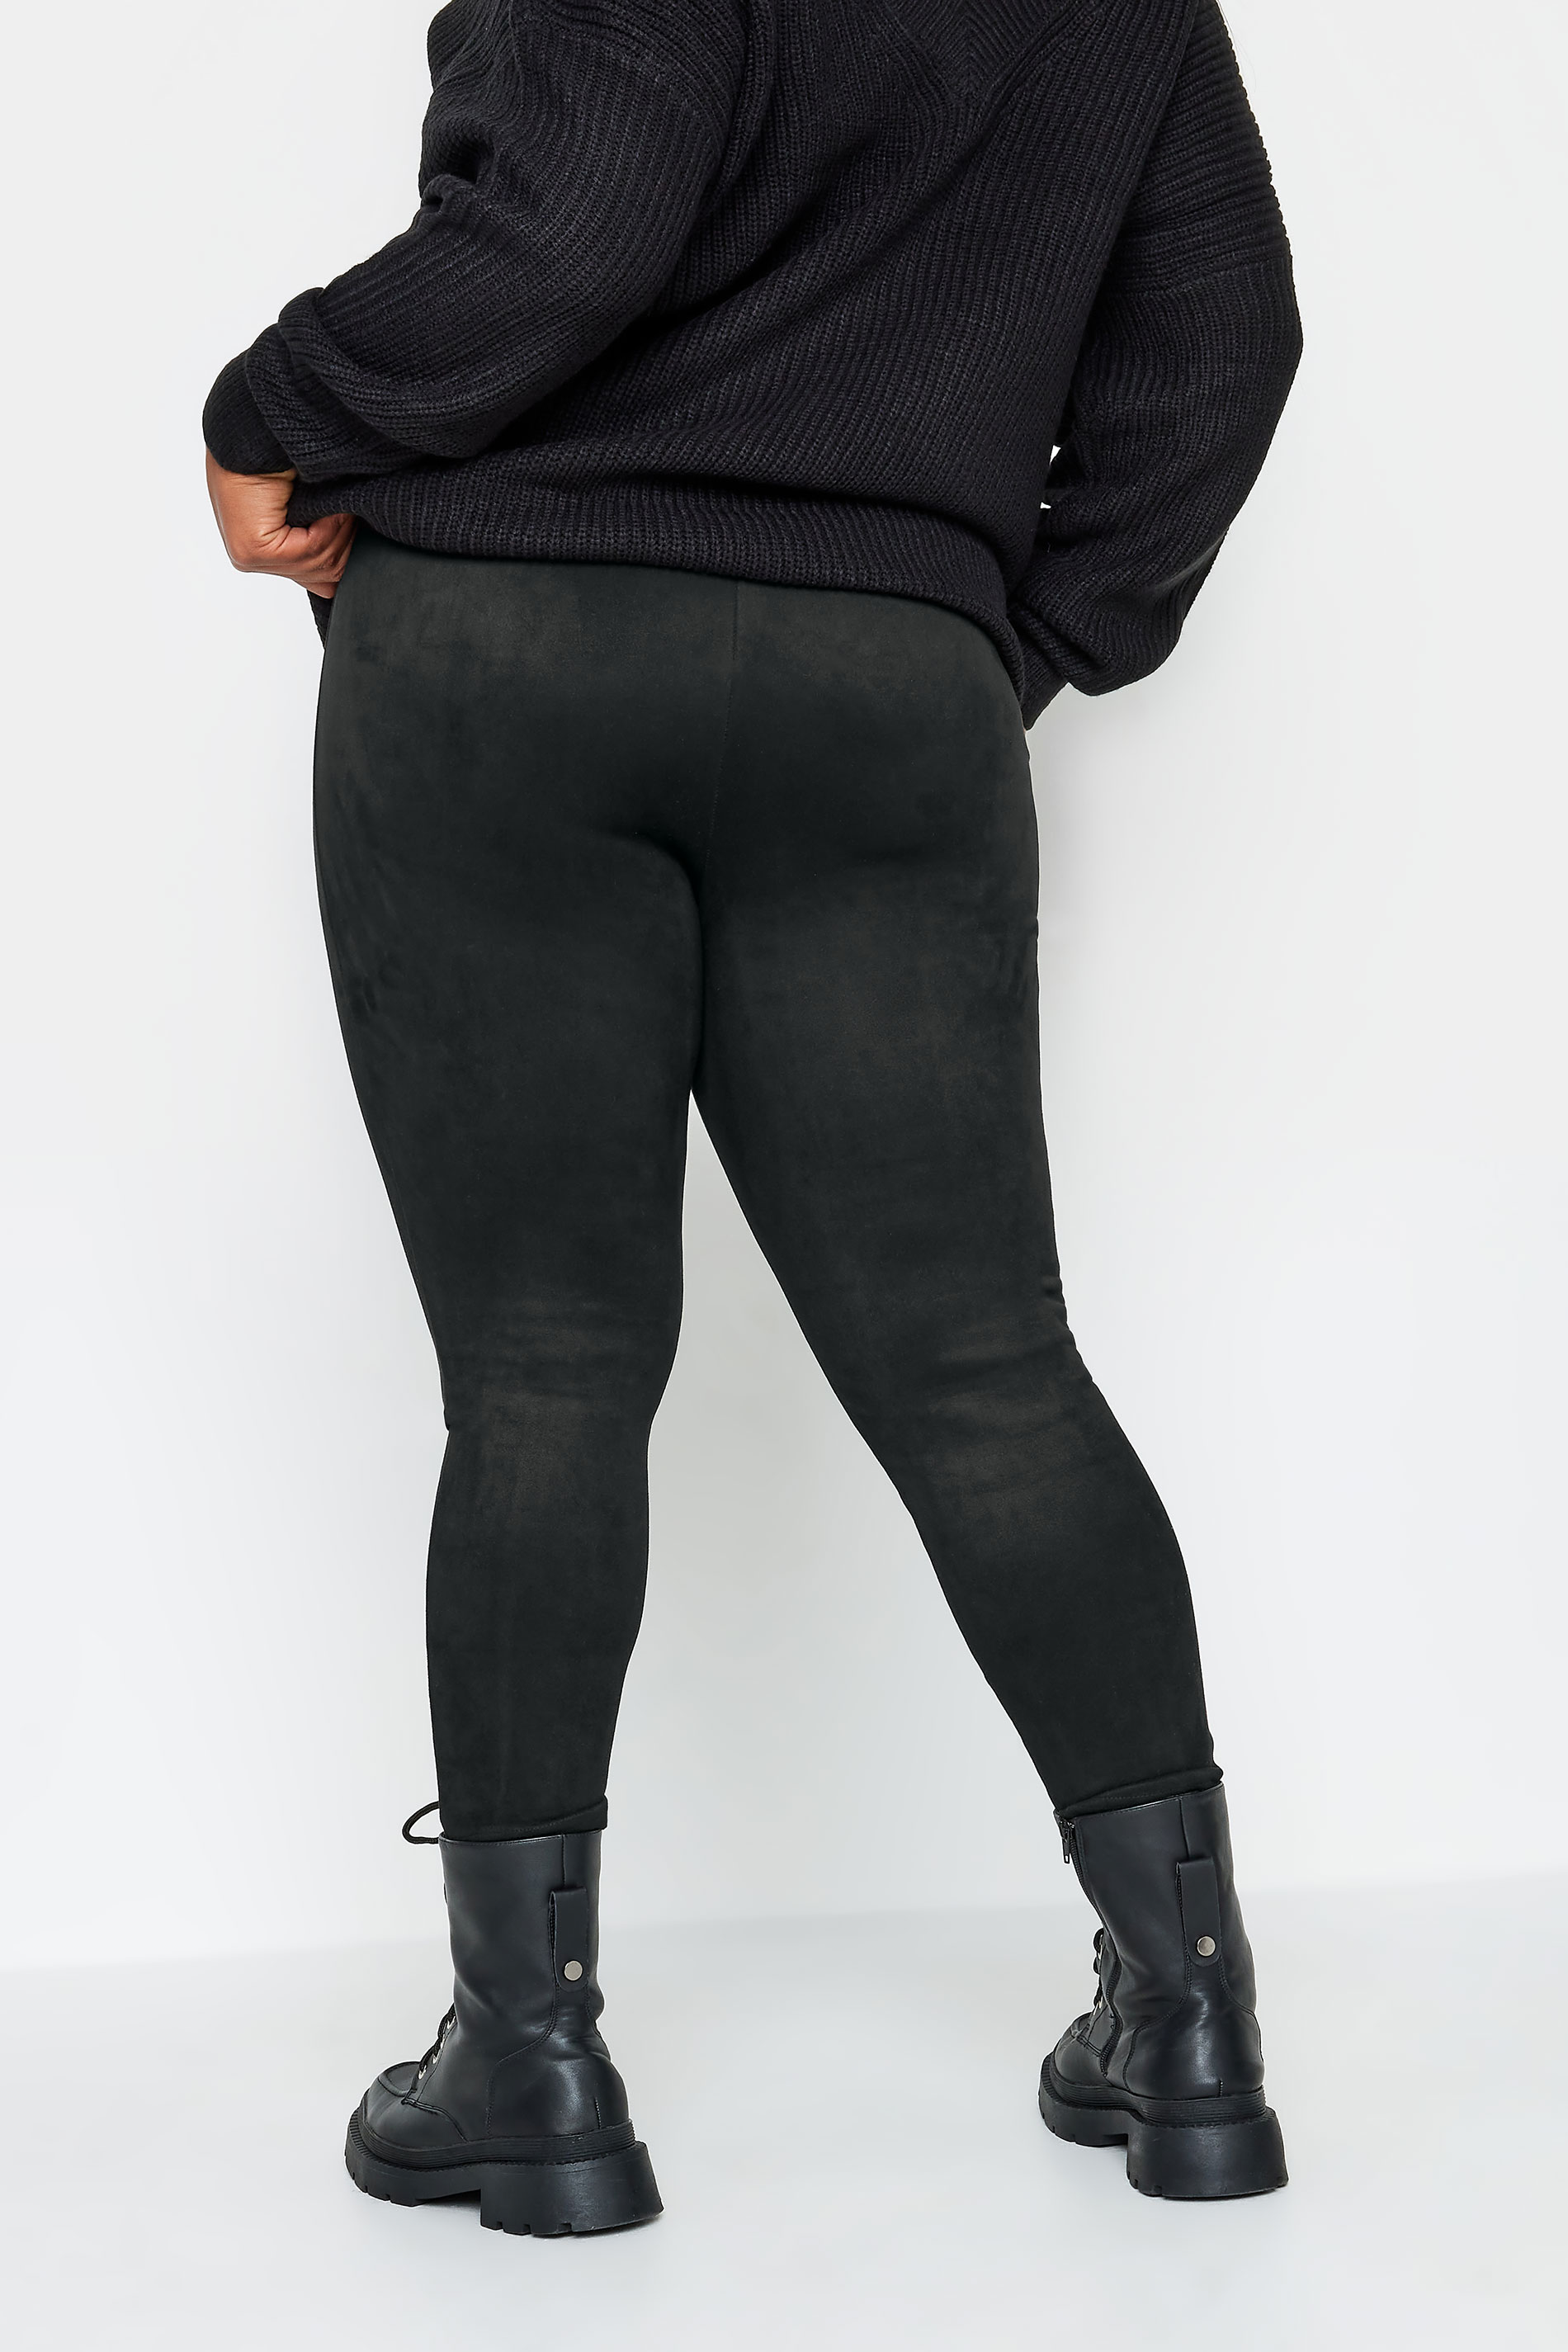 Plus Size Black Faux Suede Stretch High Waisted Leggings | Yours Clothing 3